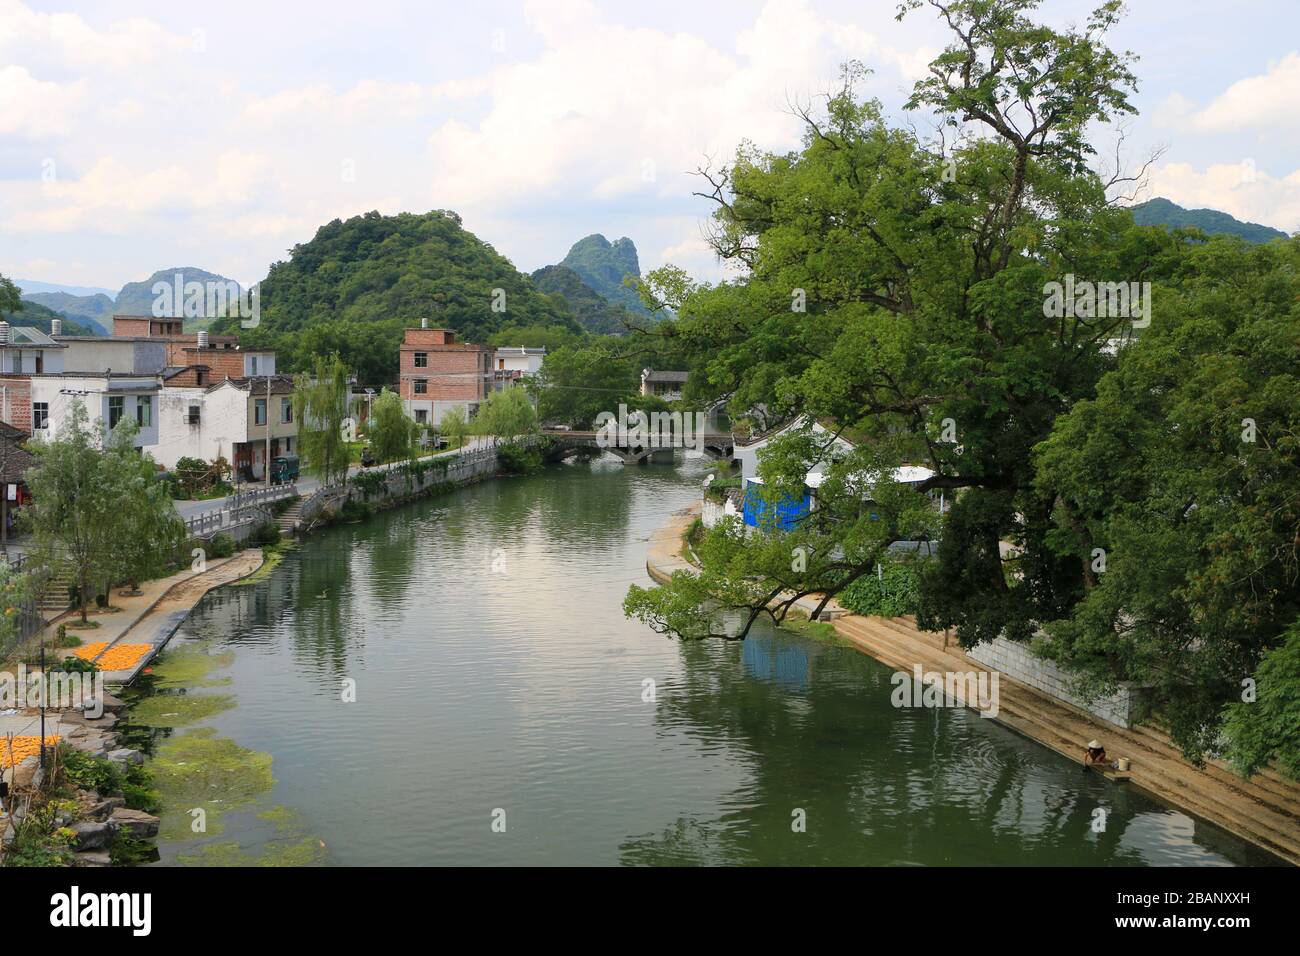 A small village next to a river Stock Photo